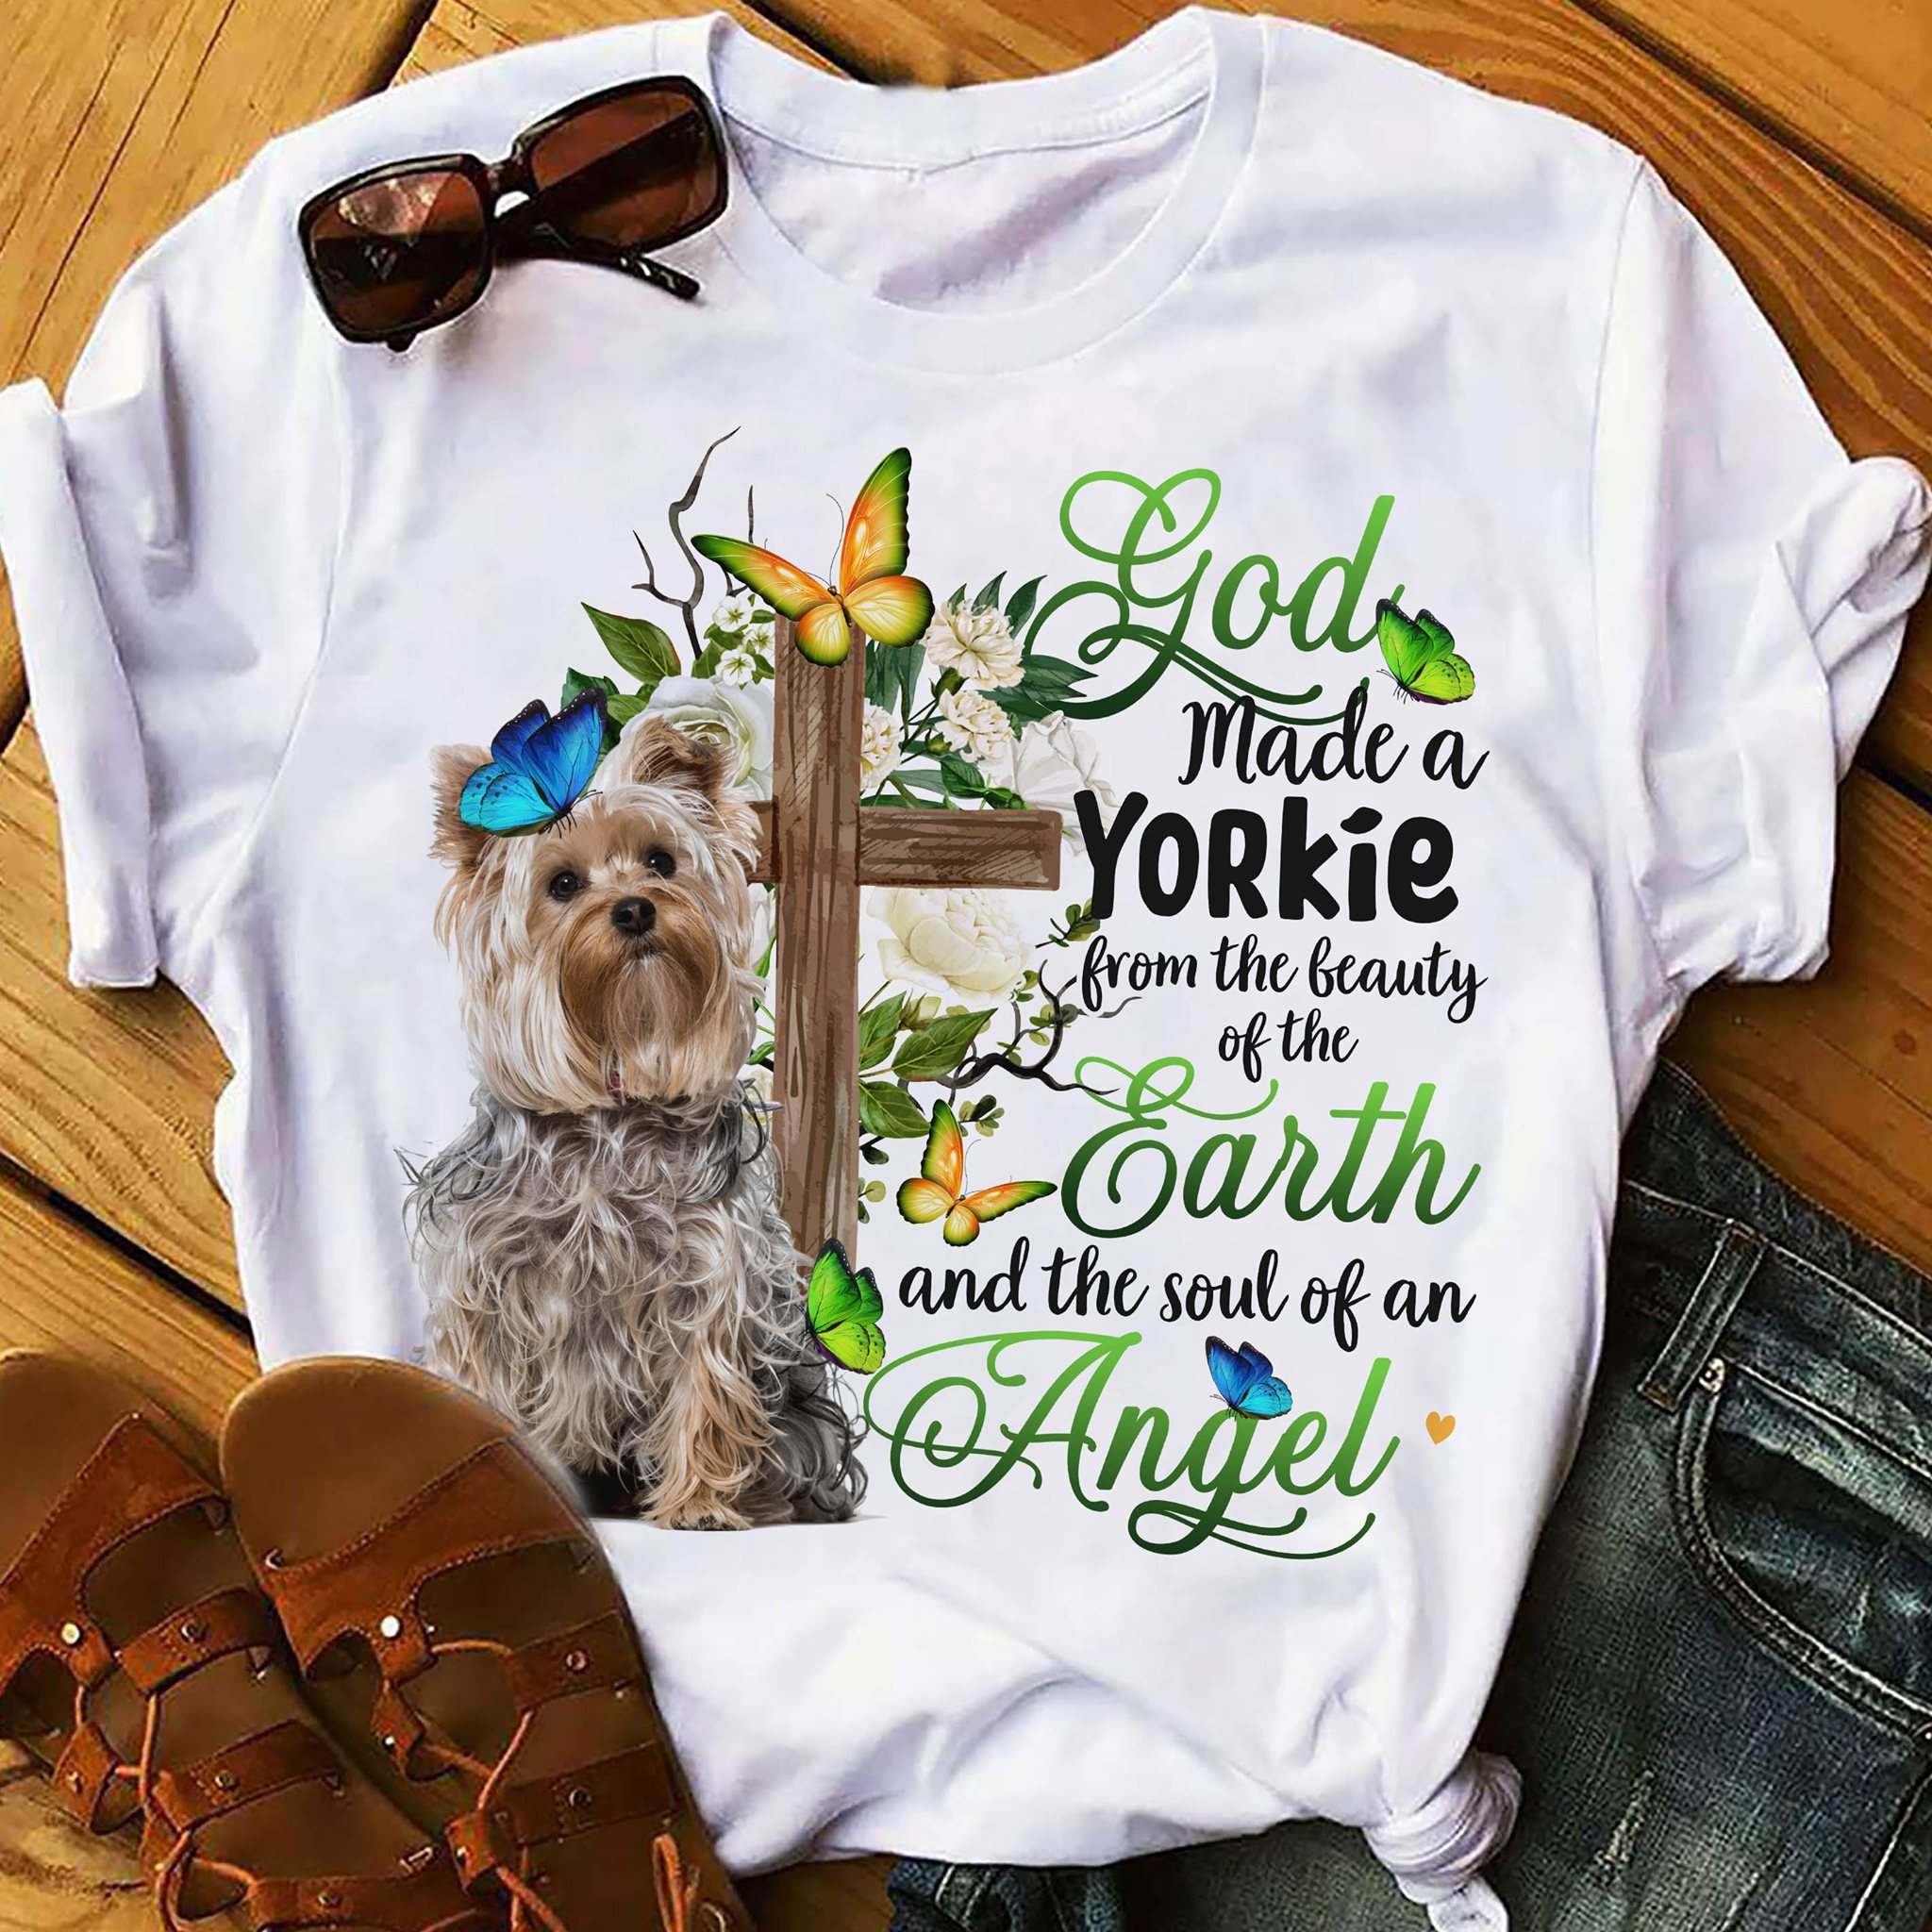 God made a Yorkie from the beauty of the earth and the soul of an angel - Yorshire dog